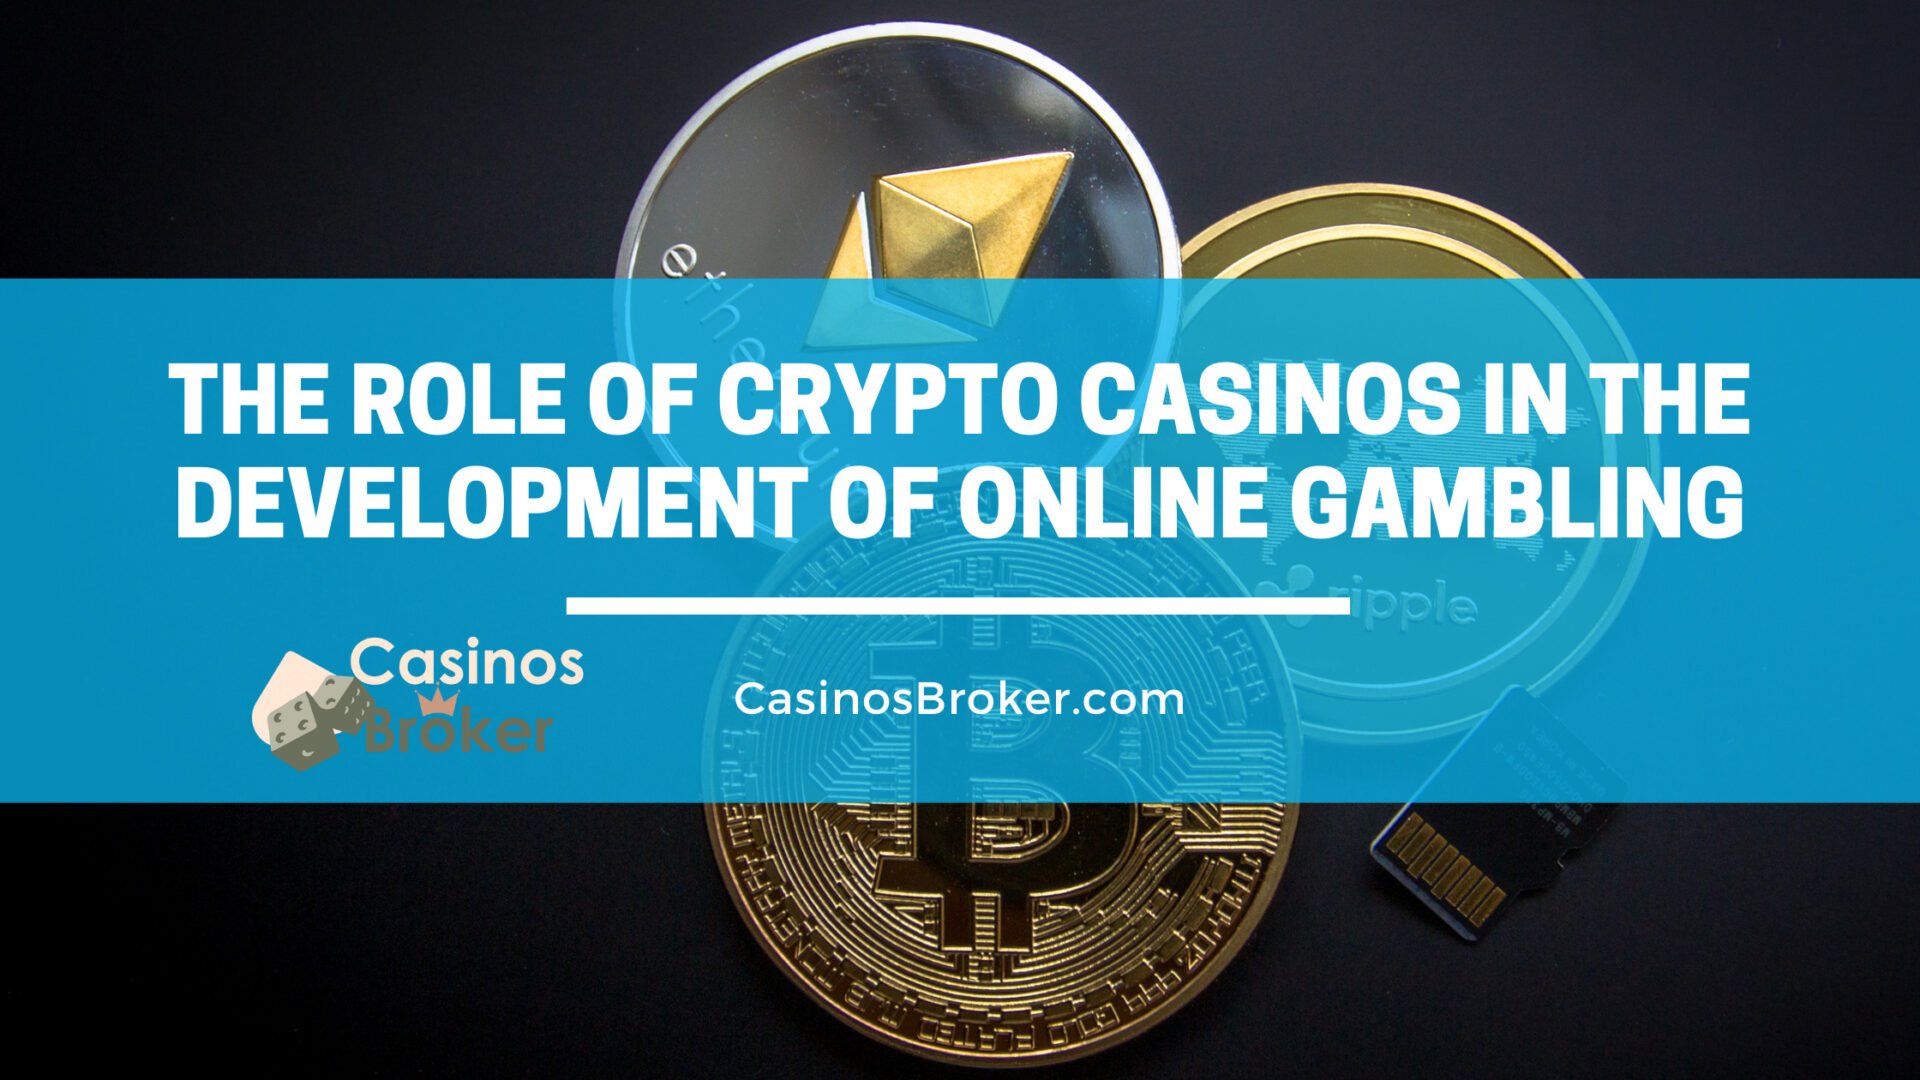 The role of crypto casinos in the development of online gambling